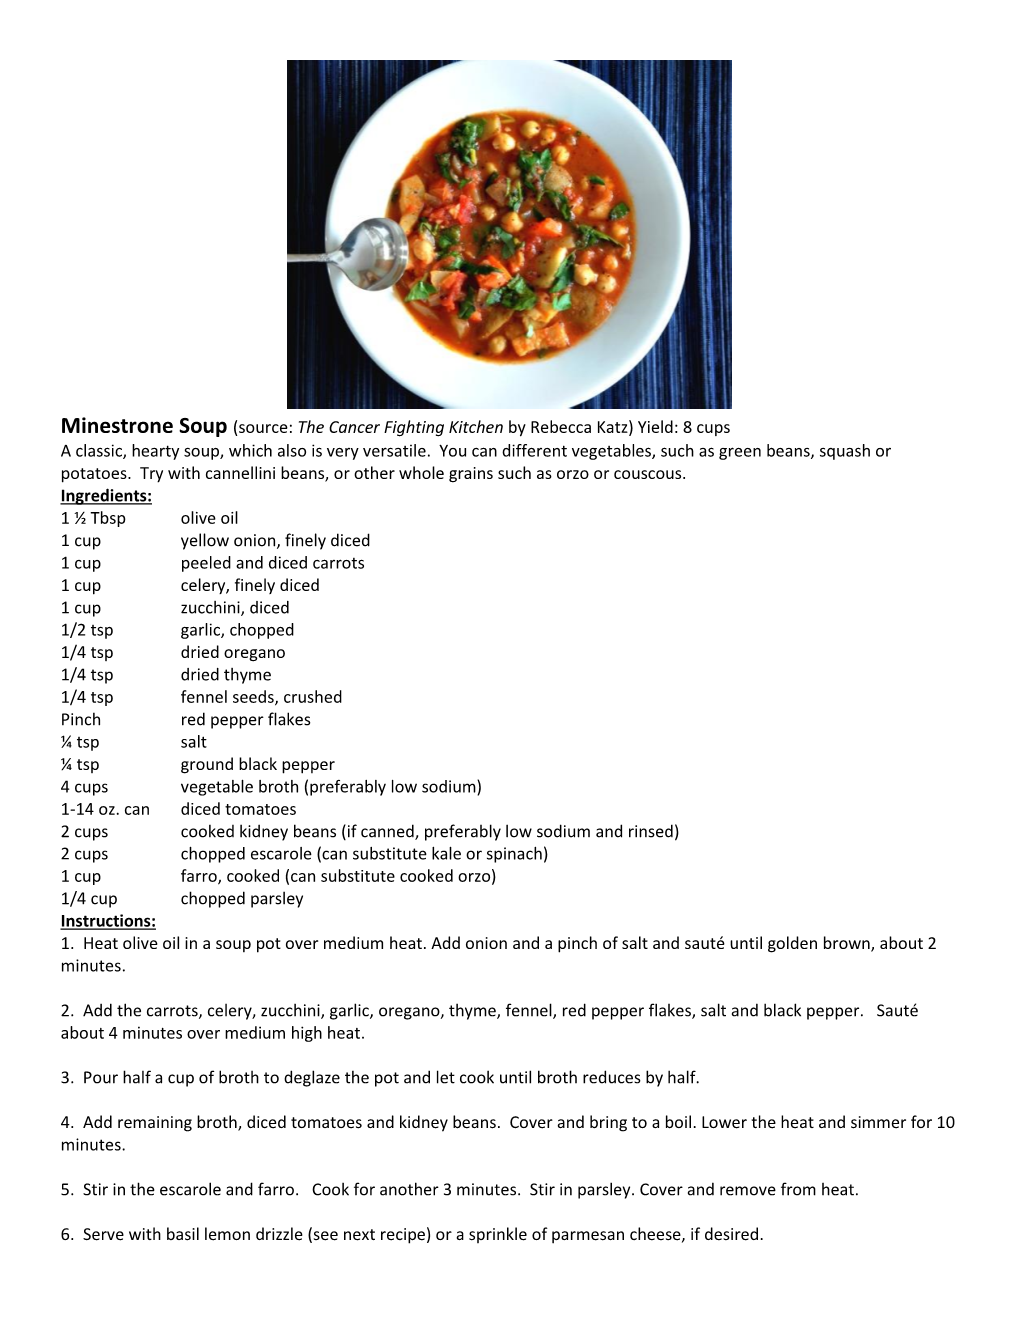 Minestrone Soup (Source: the Cancer Fighting Kitchen by Rebecca Katz) Yield: 8 Cups a Classic, Hearty Soup, Which Also Is Very Versatile